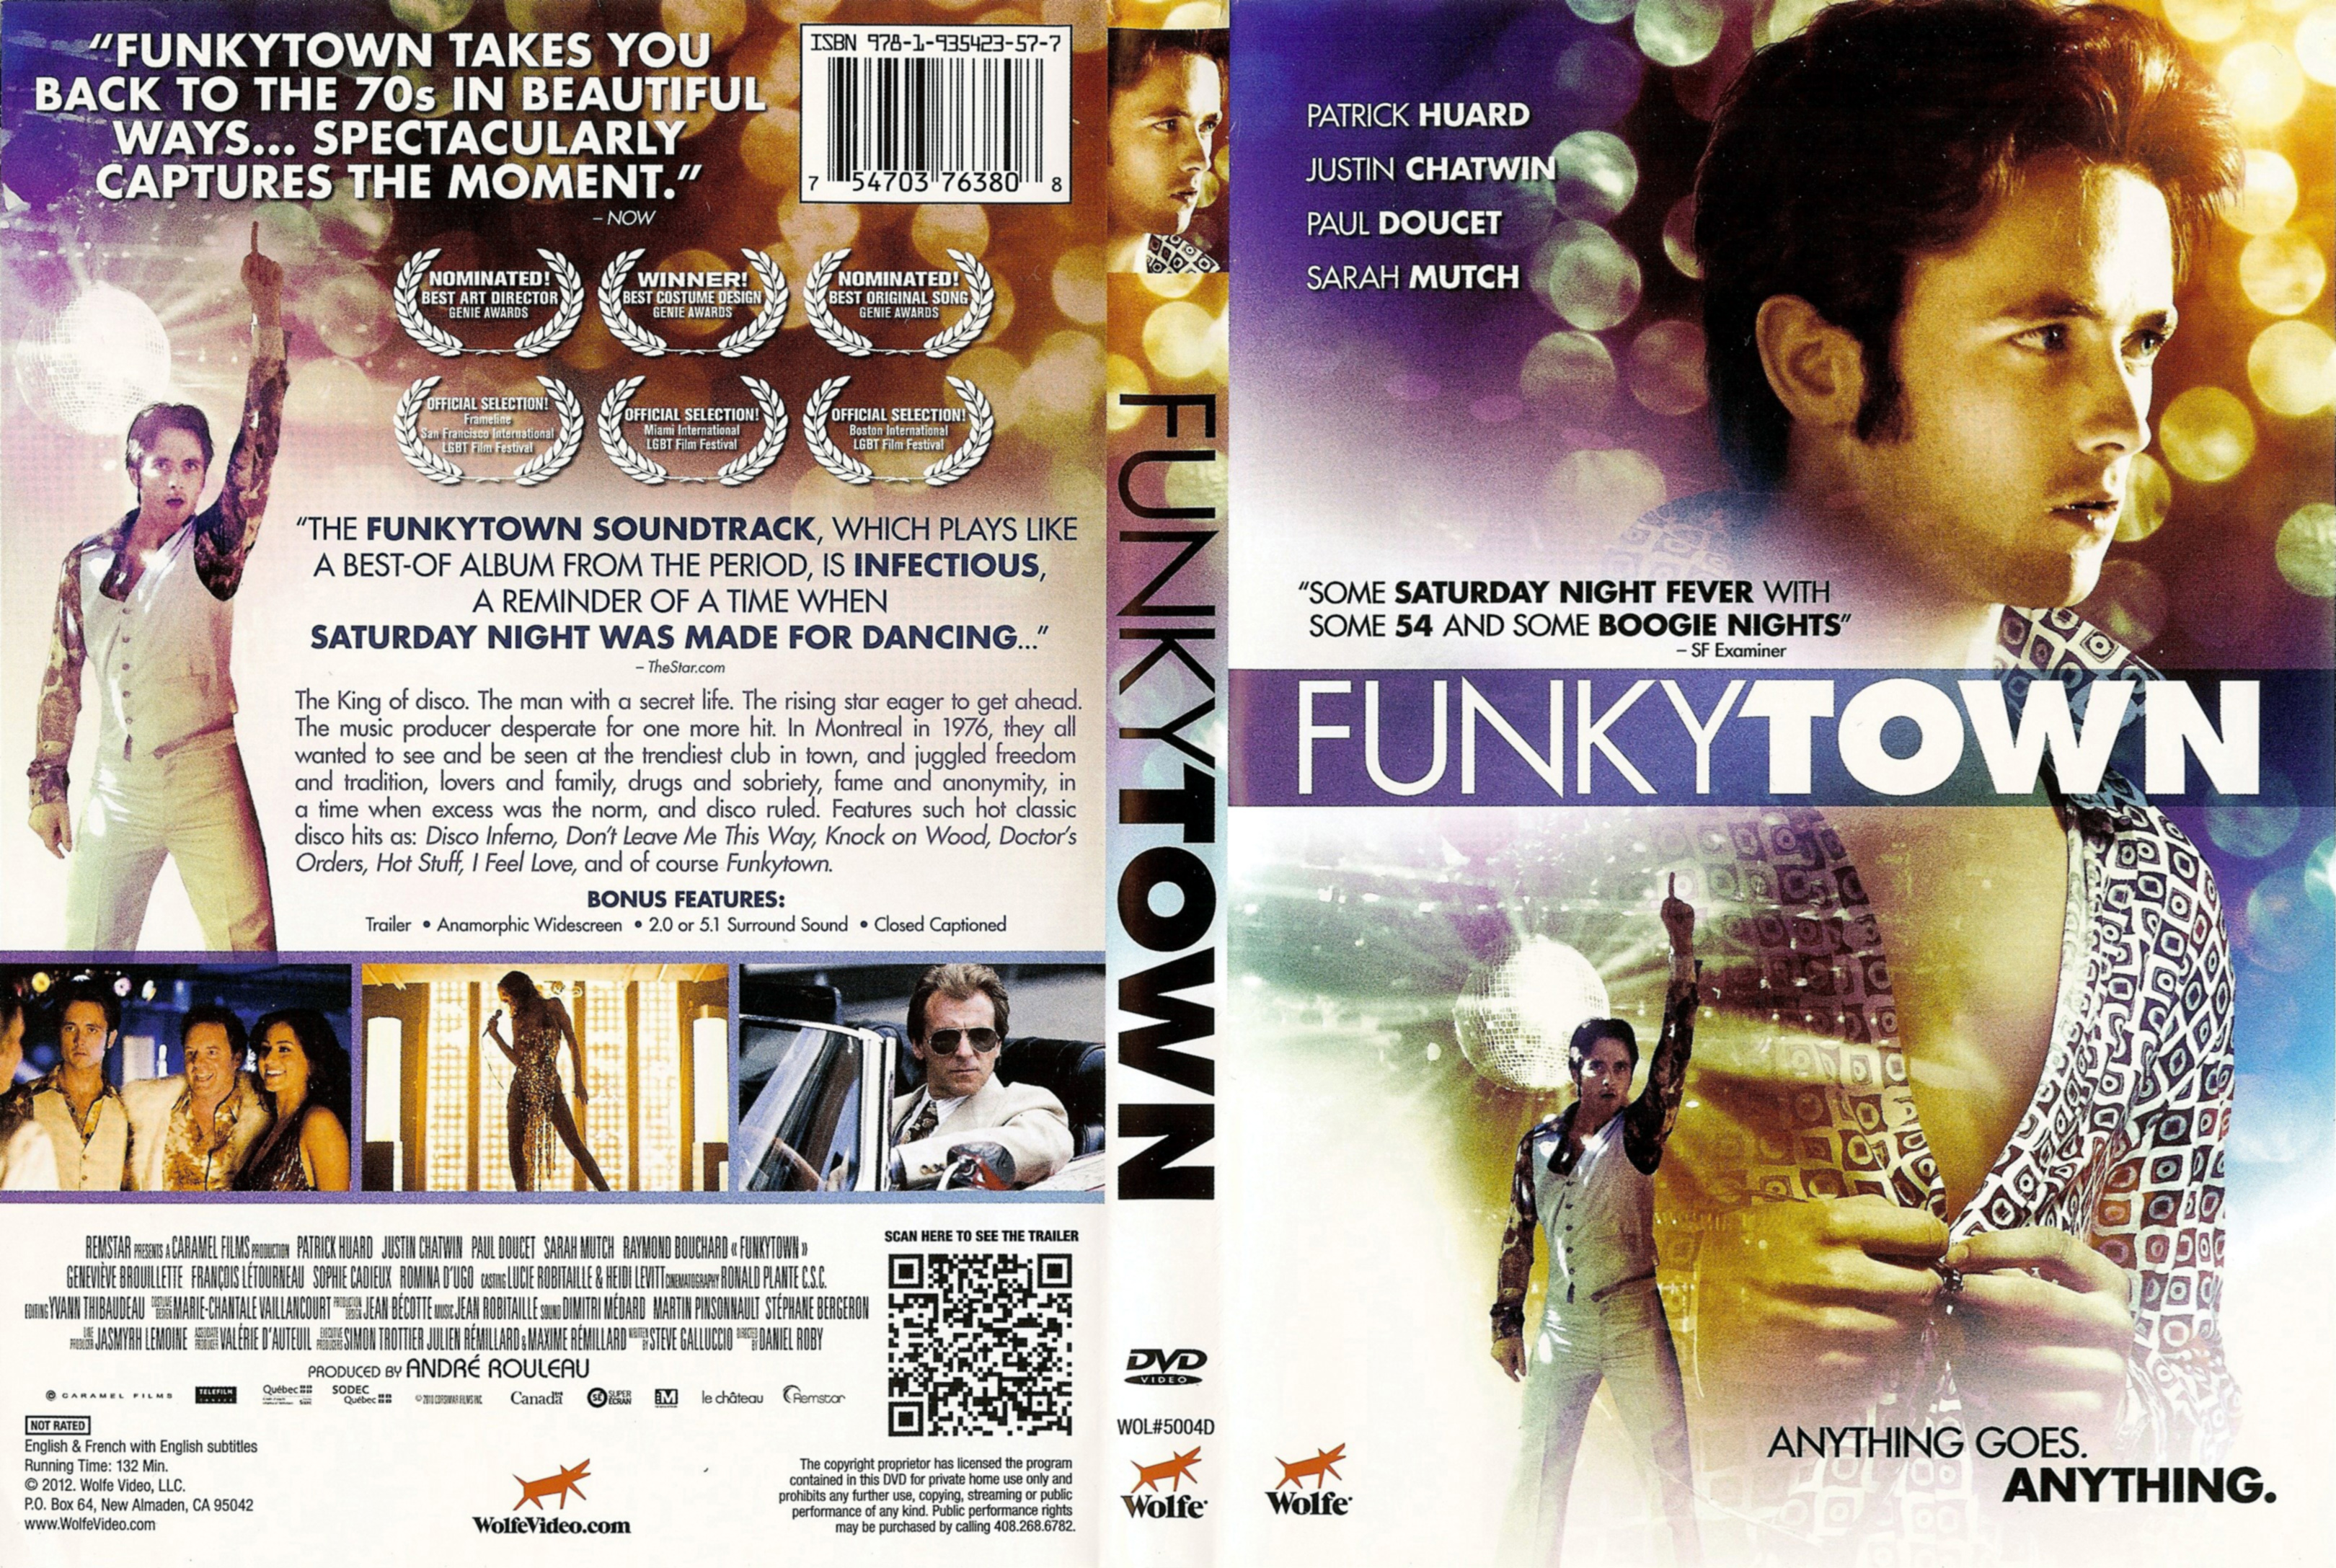 Jaquette DVD Funkytown Zone 1